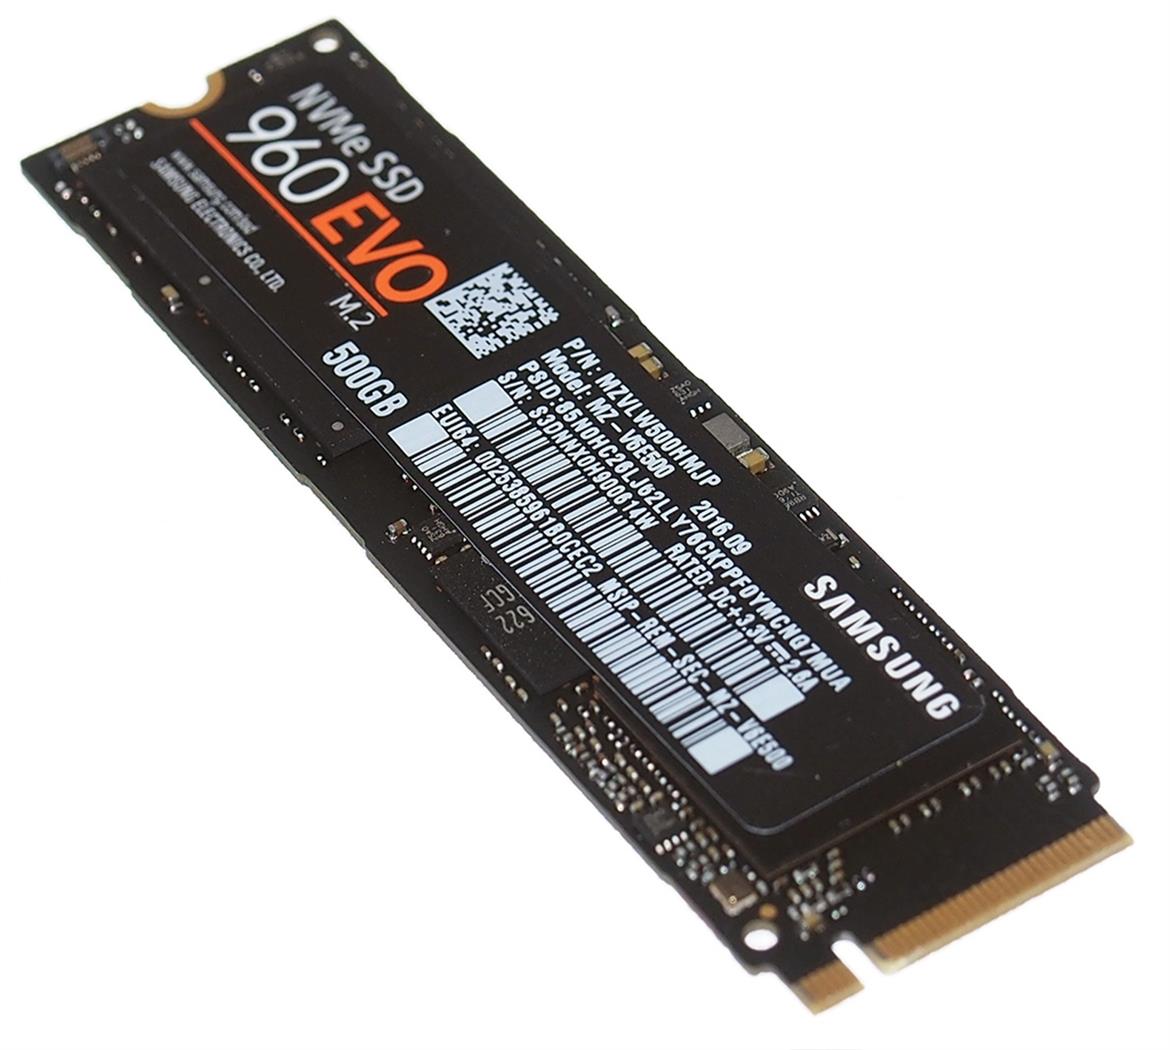 Samsung SSD 960 EVO NVMe M.2 Review: Ultra Fast, Affordable Storage